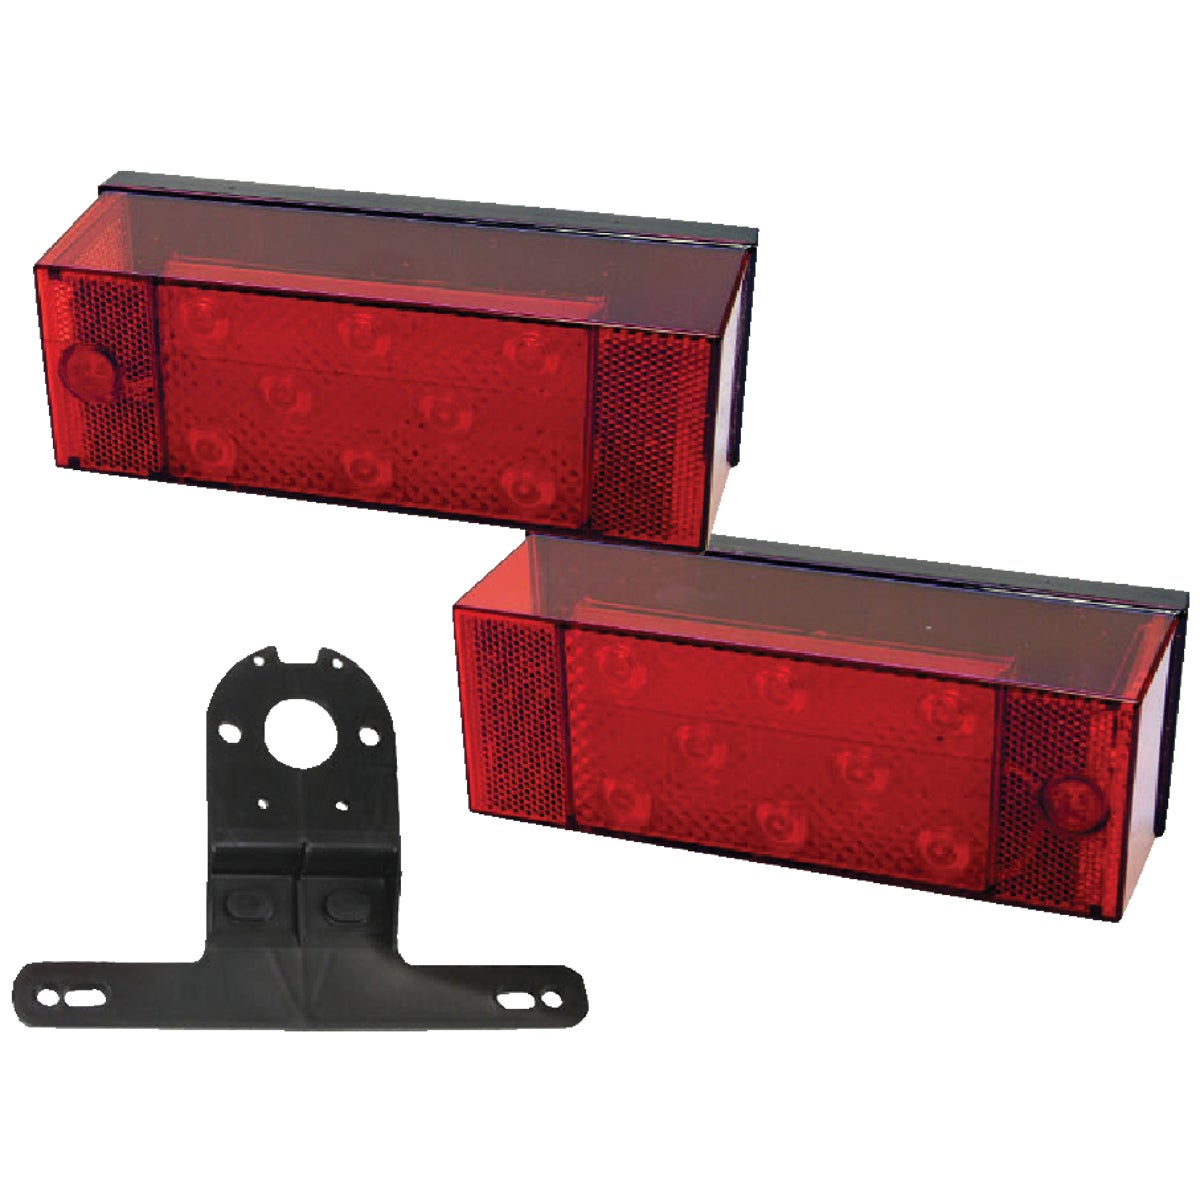 Item 575023, The ProClass Submersible Low Profile LED Trailer Light Kit functions as a 